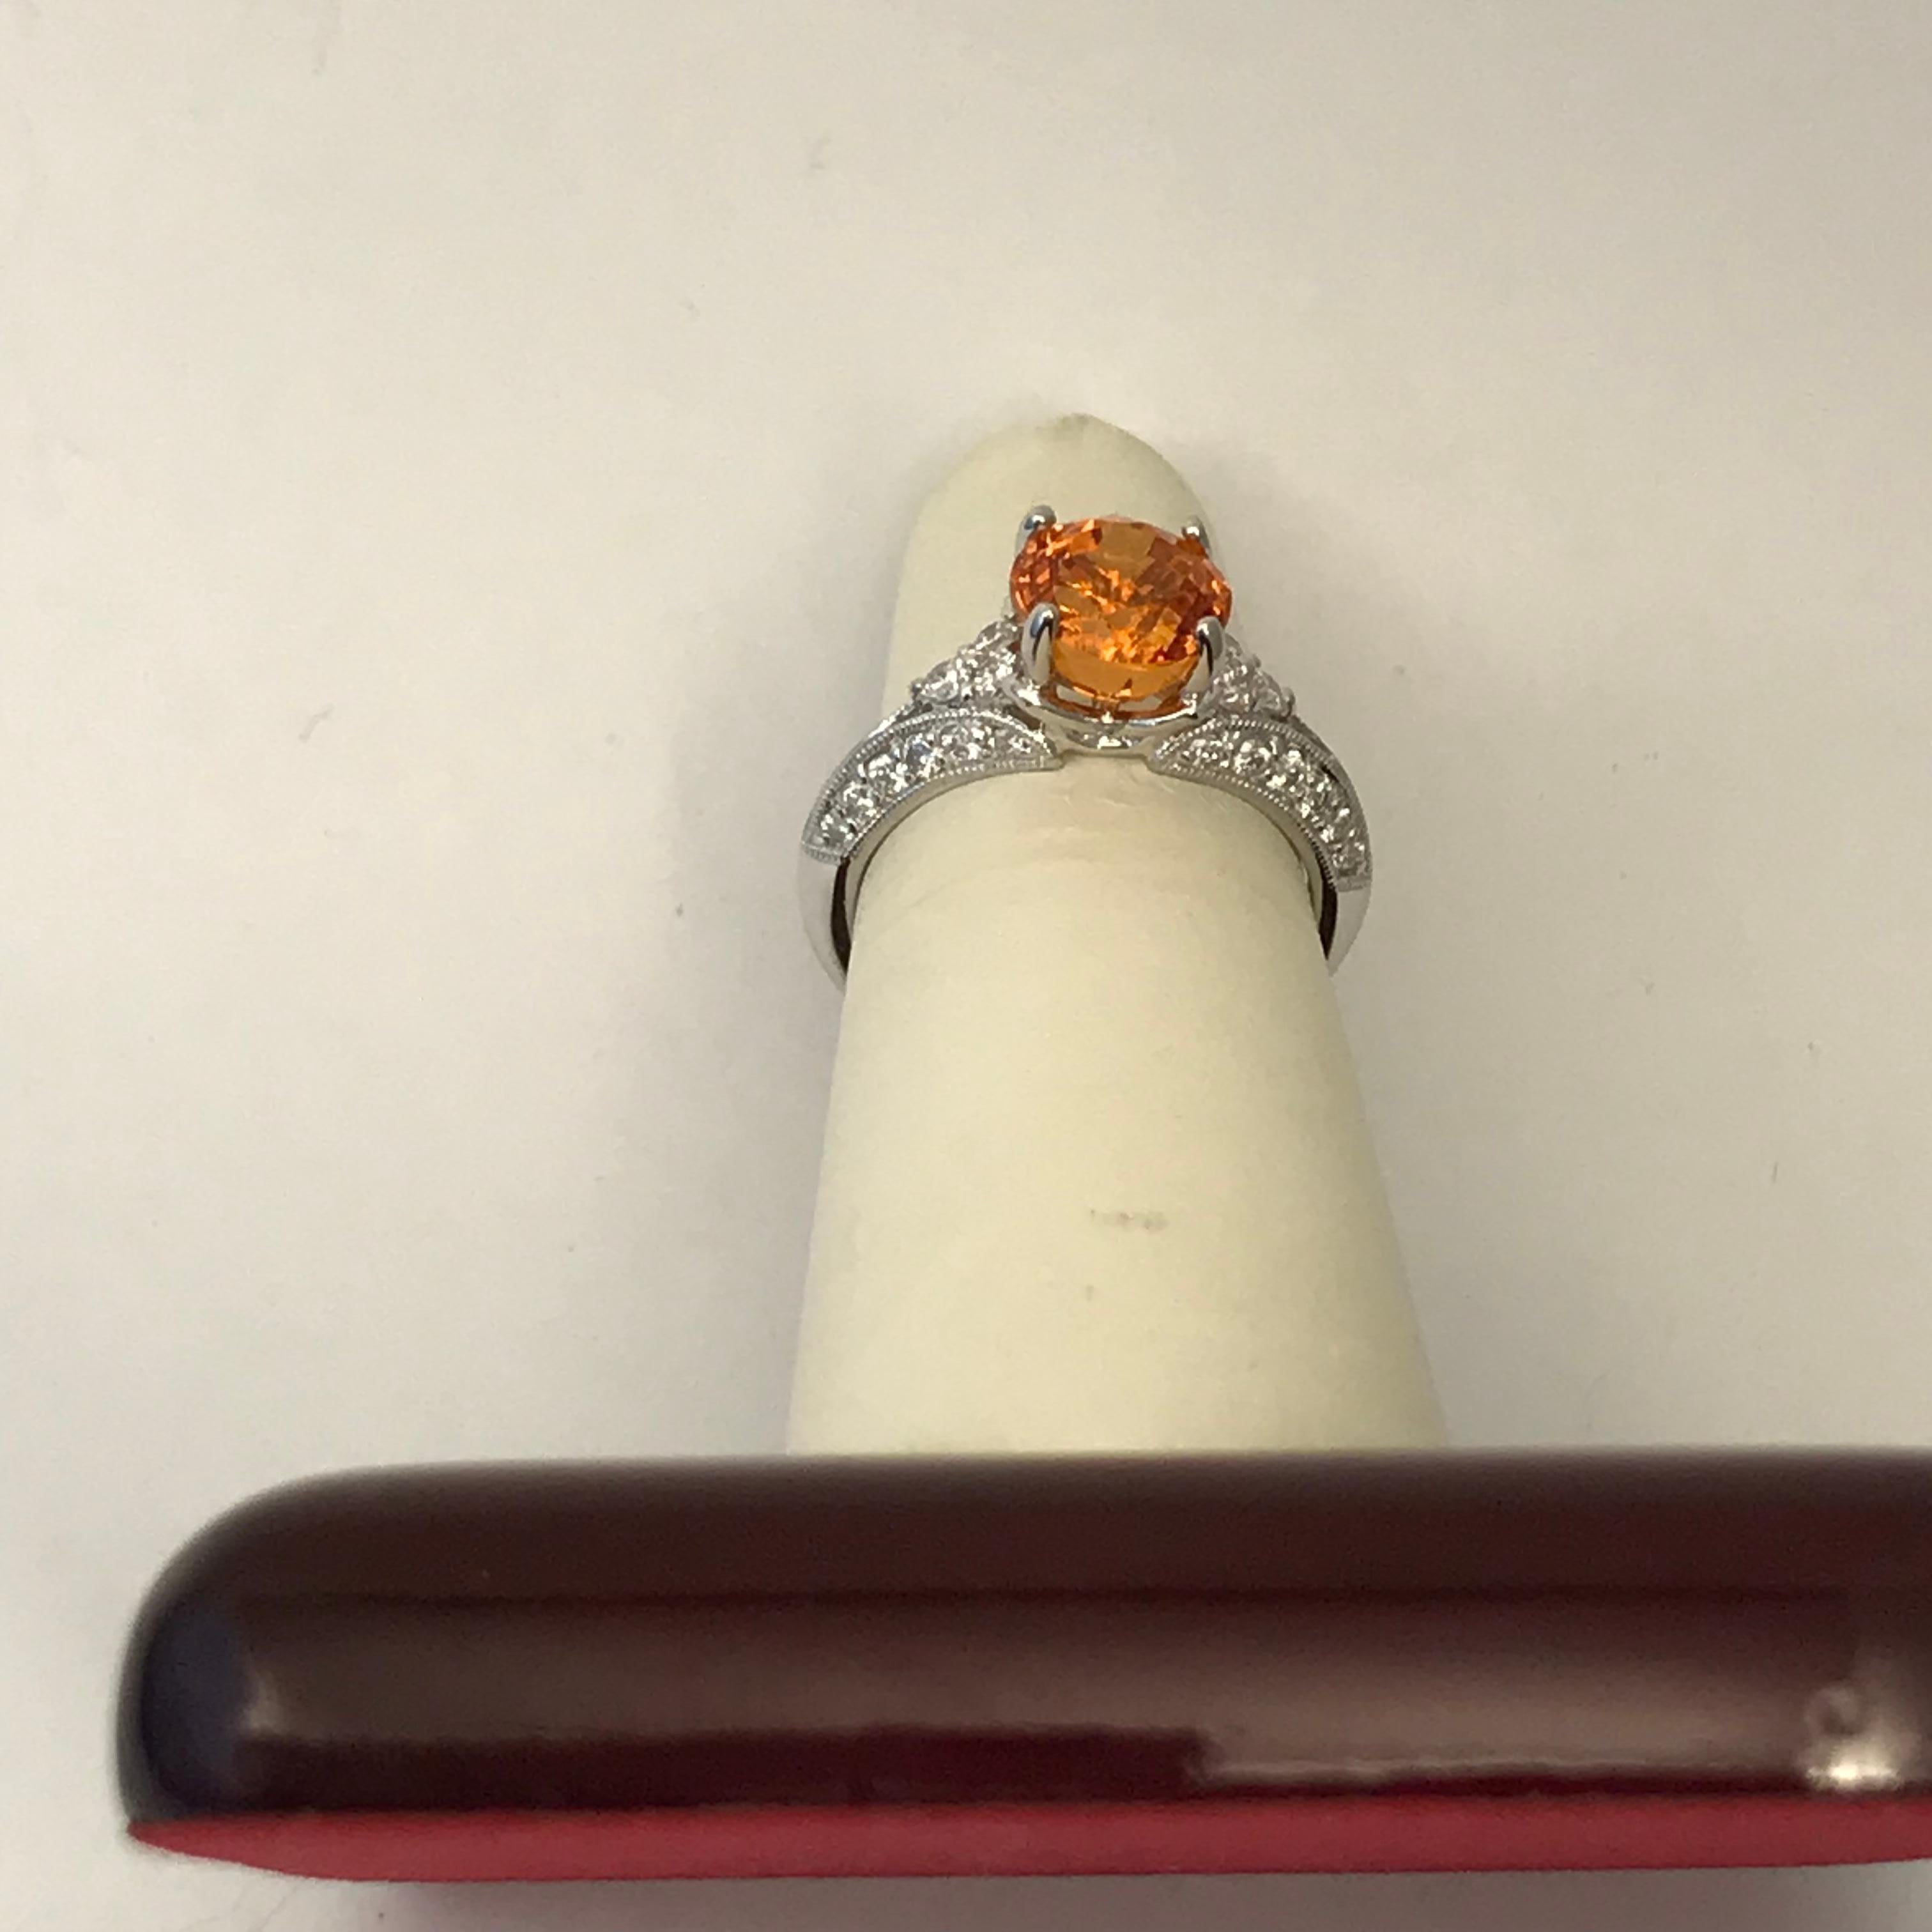 3.31 Carat Orange Spessartite Garnet Ring Set in Platinum 
Orange Spessartite Garnet 3.31 ct. platinum and diamonds .53 ct. 5.6 grams of gold

Ring will be sized free of charge after purchase just specify  ring size when ordering.

